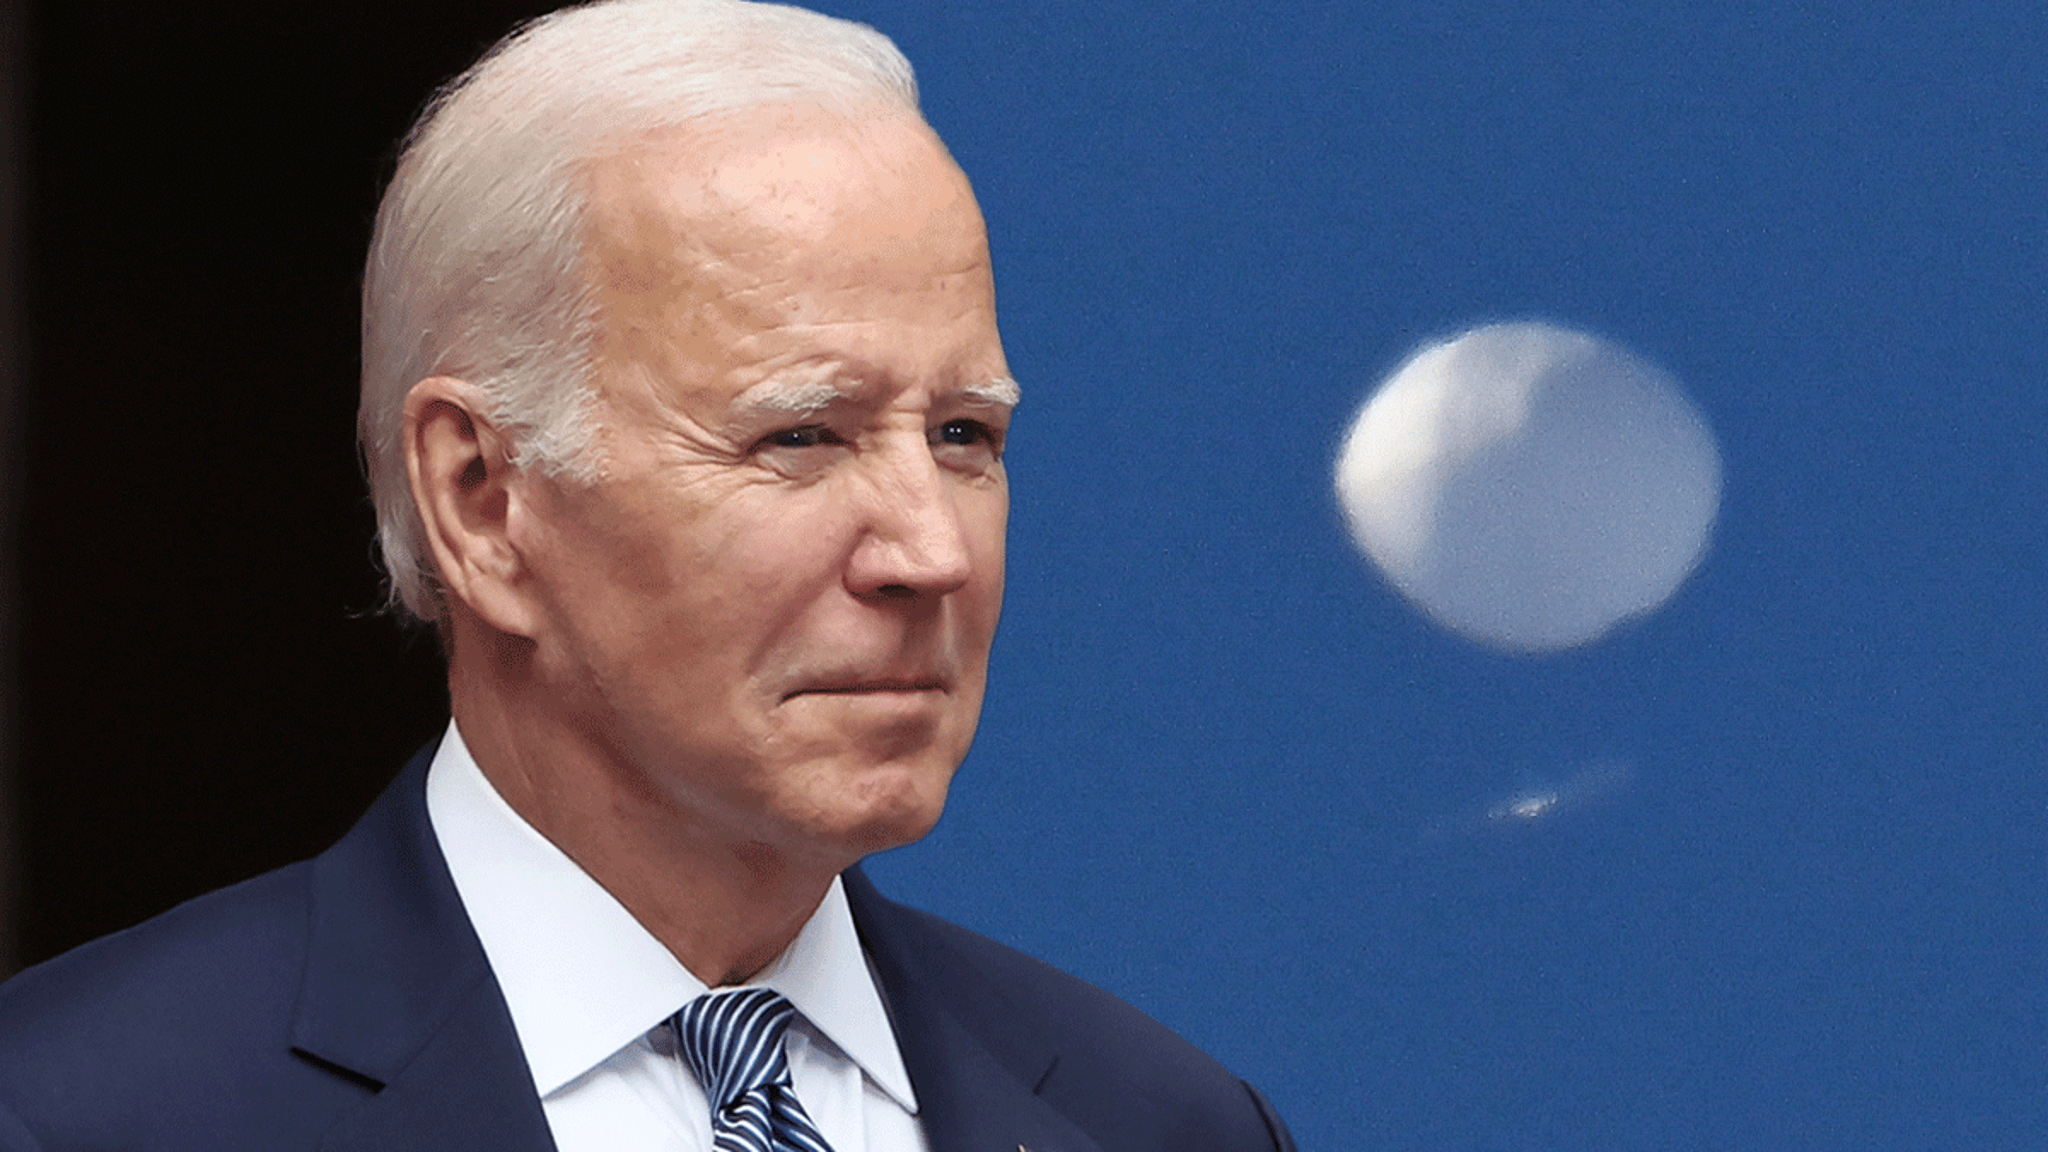 U.S. Poised to Shoot Down Chinese Balloon, Biden Will ‘Take Care Of It’